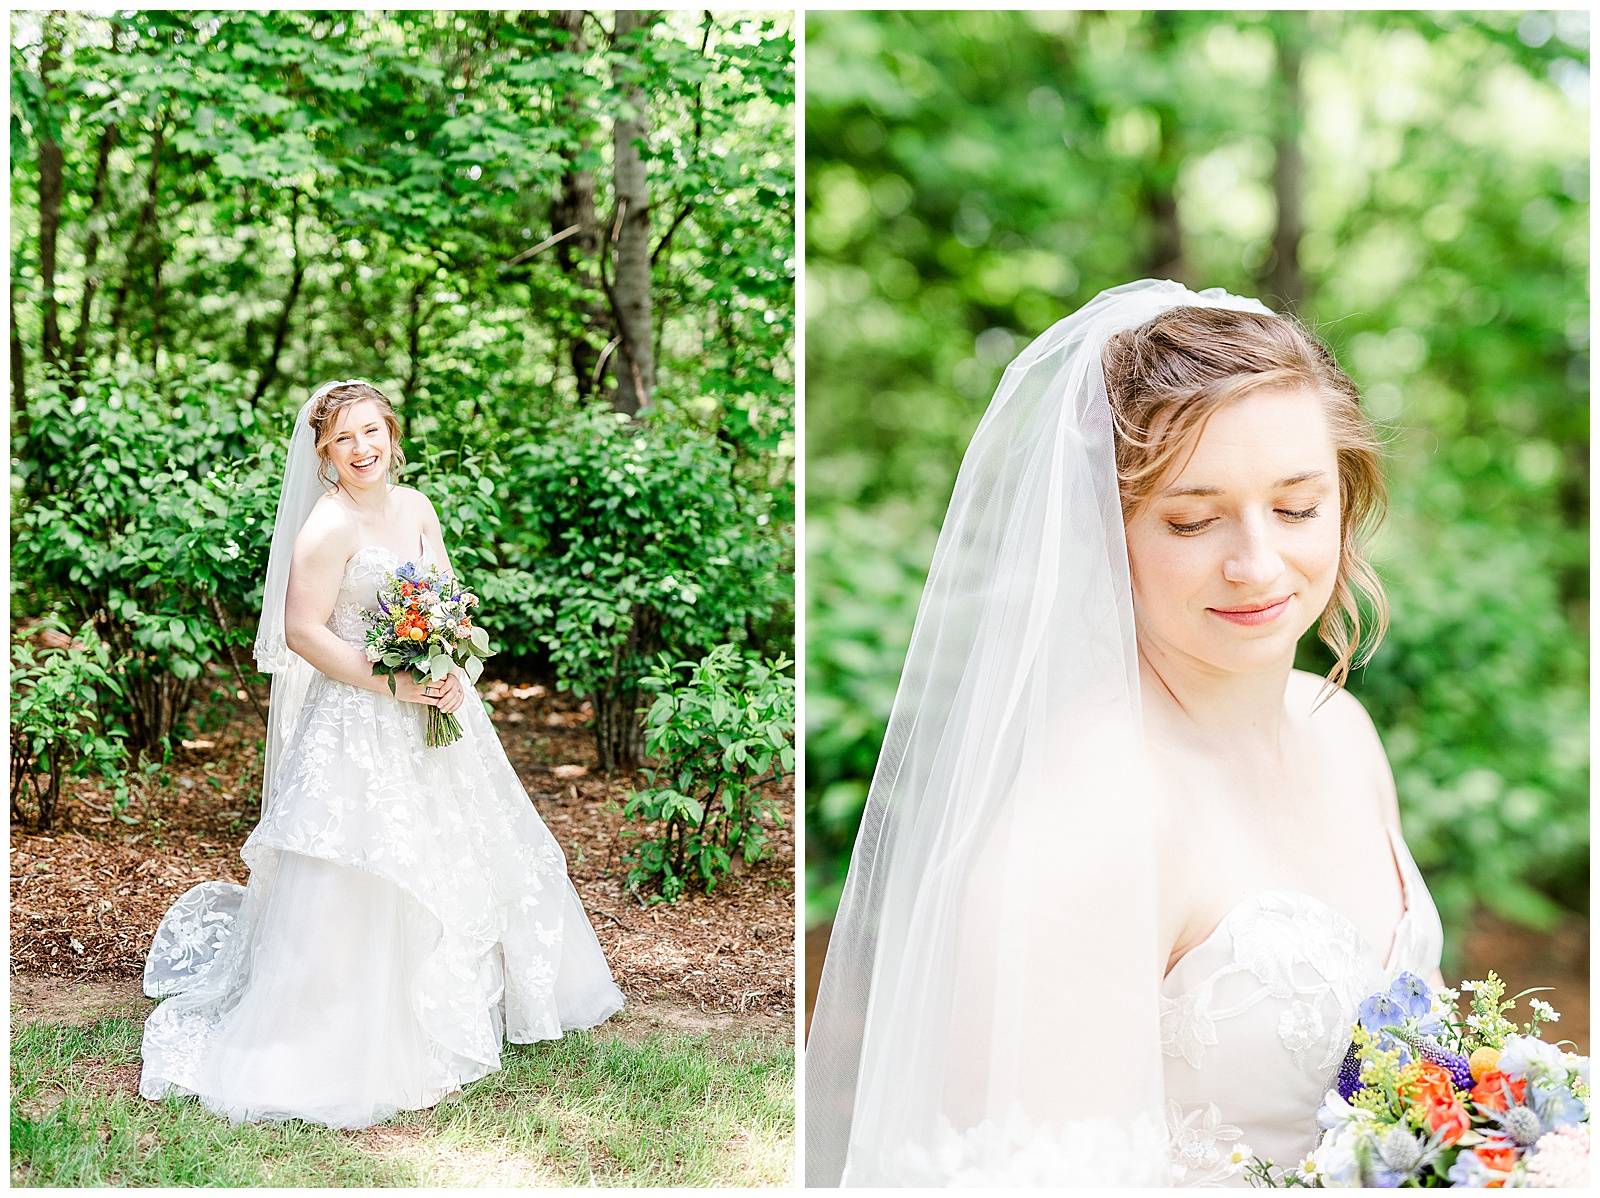 forest location 👰 Bride: lace wedding dress + veil 💐 Colorful orange and blue bouquet 📸 Outdoorsy Lake and Mountain Bridal Session with Julia | Kevyn Dixon Photography